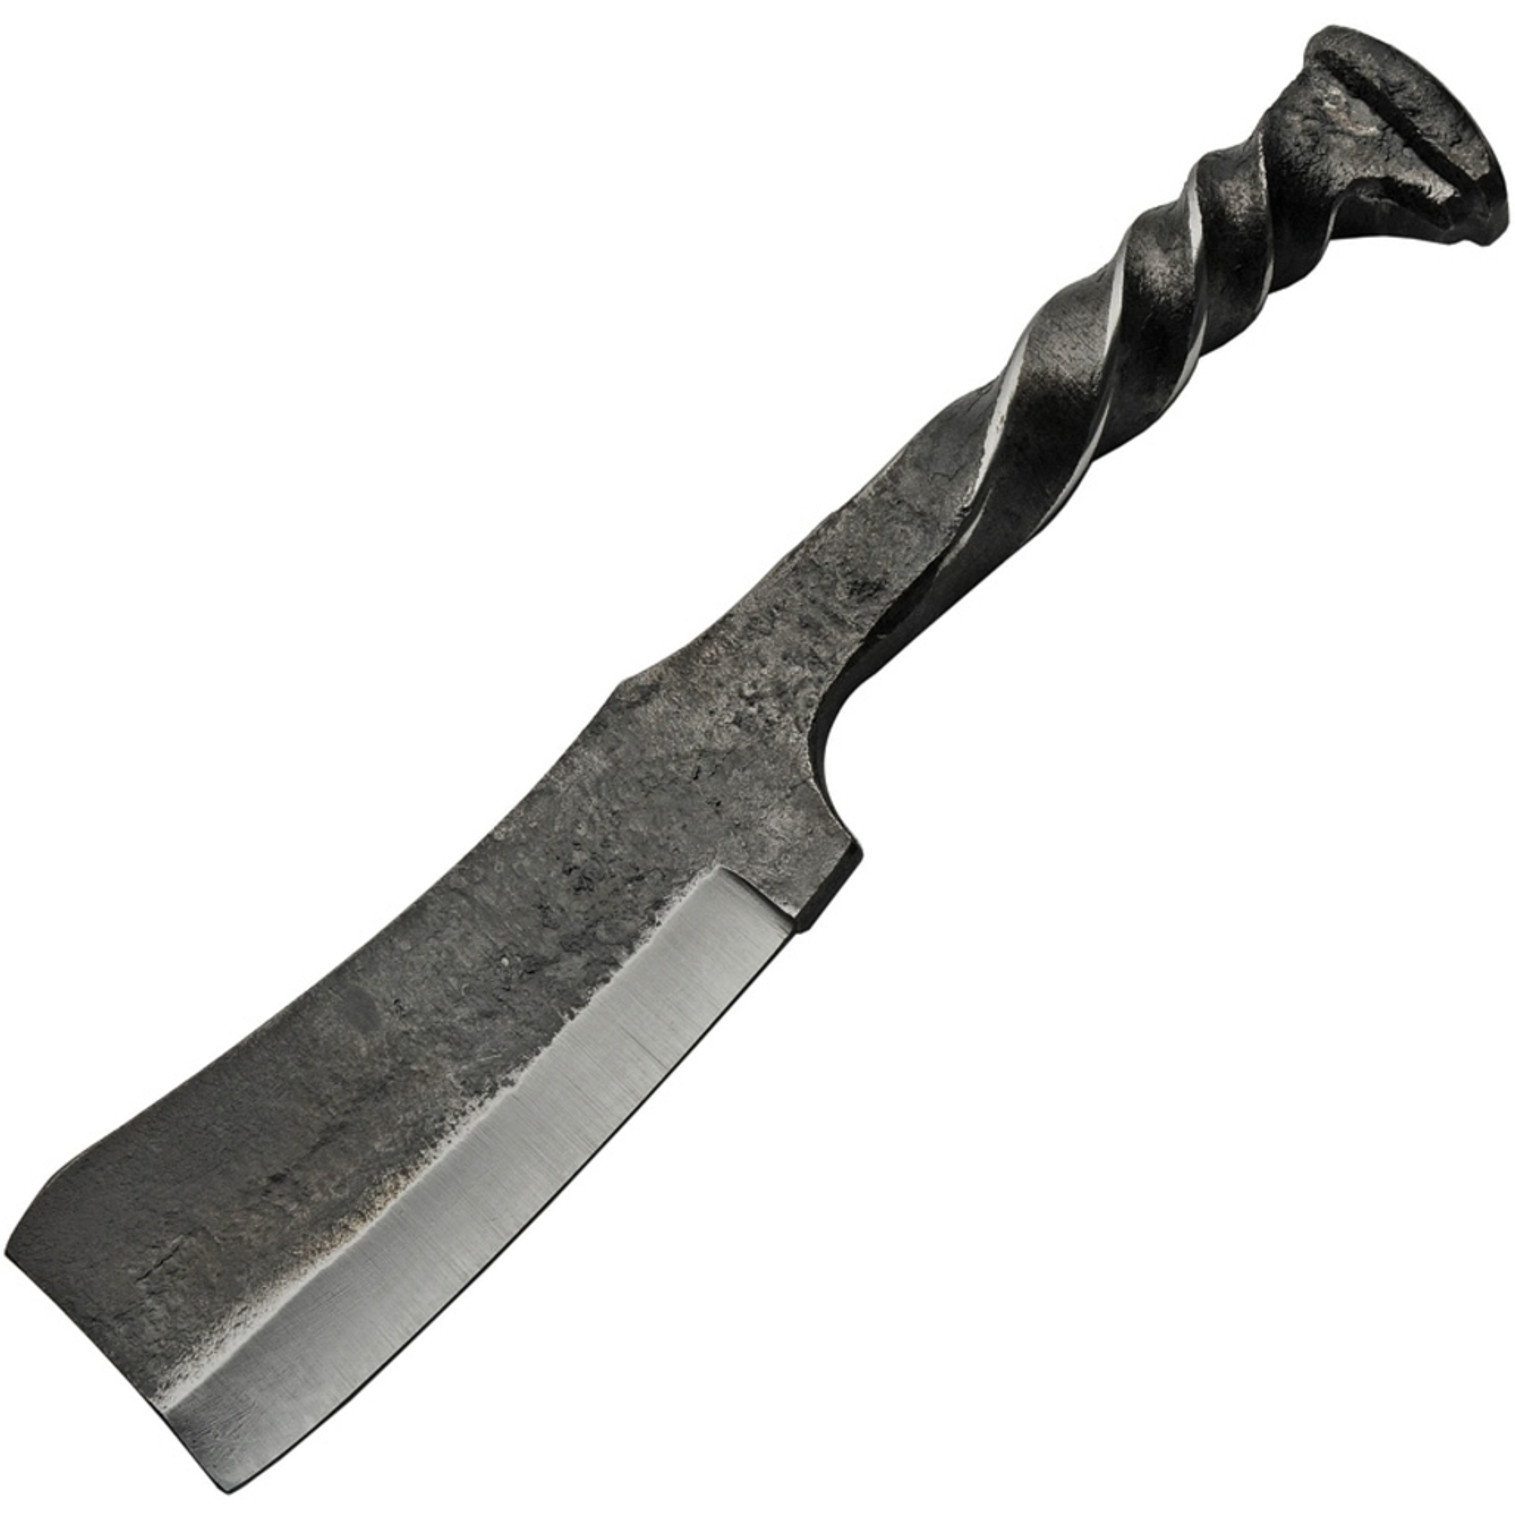 Railroad Style Cleaver